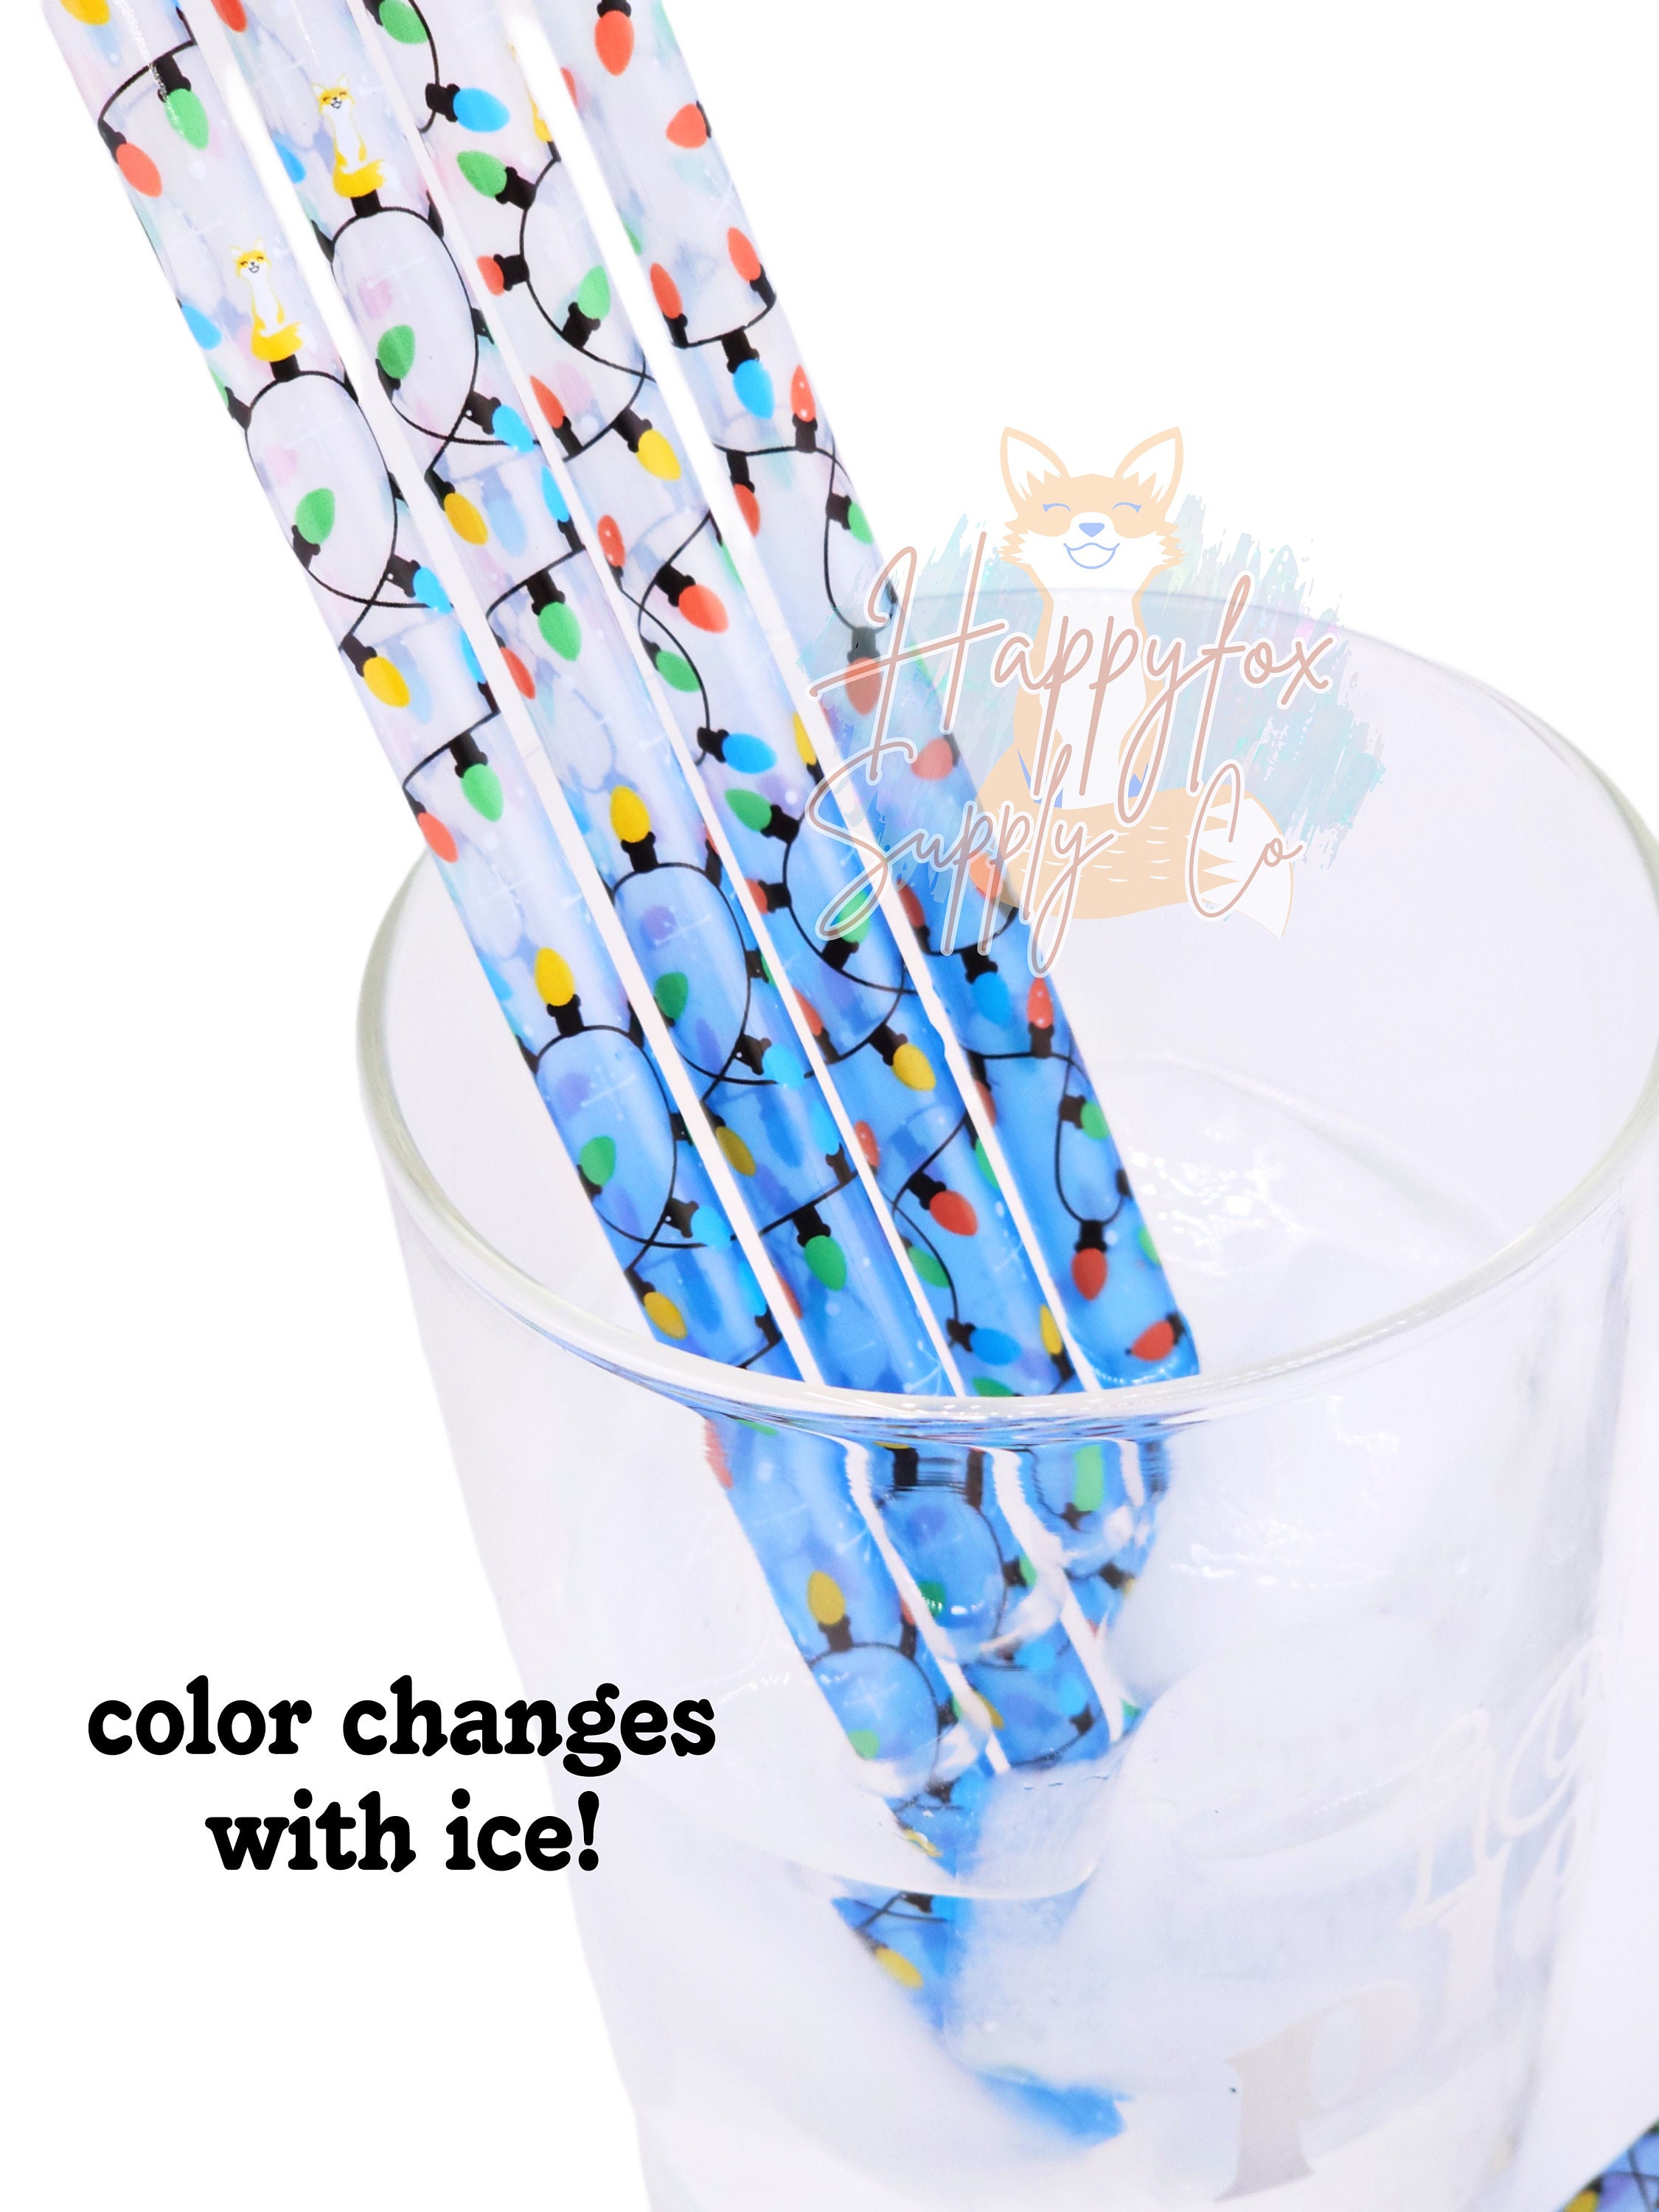 10 ORIGINAL Rainbow Reusable Plastic Straws 5-30 Pack for Tumblers, Cups,  Water Bottles Printed Straws Decorative 